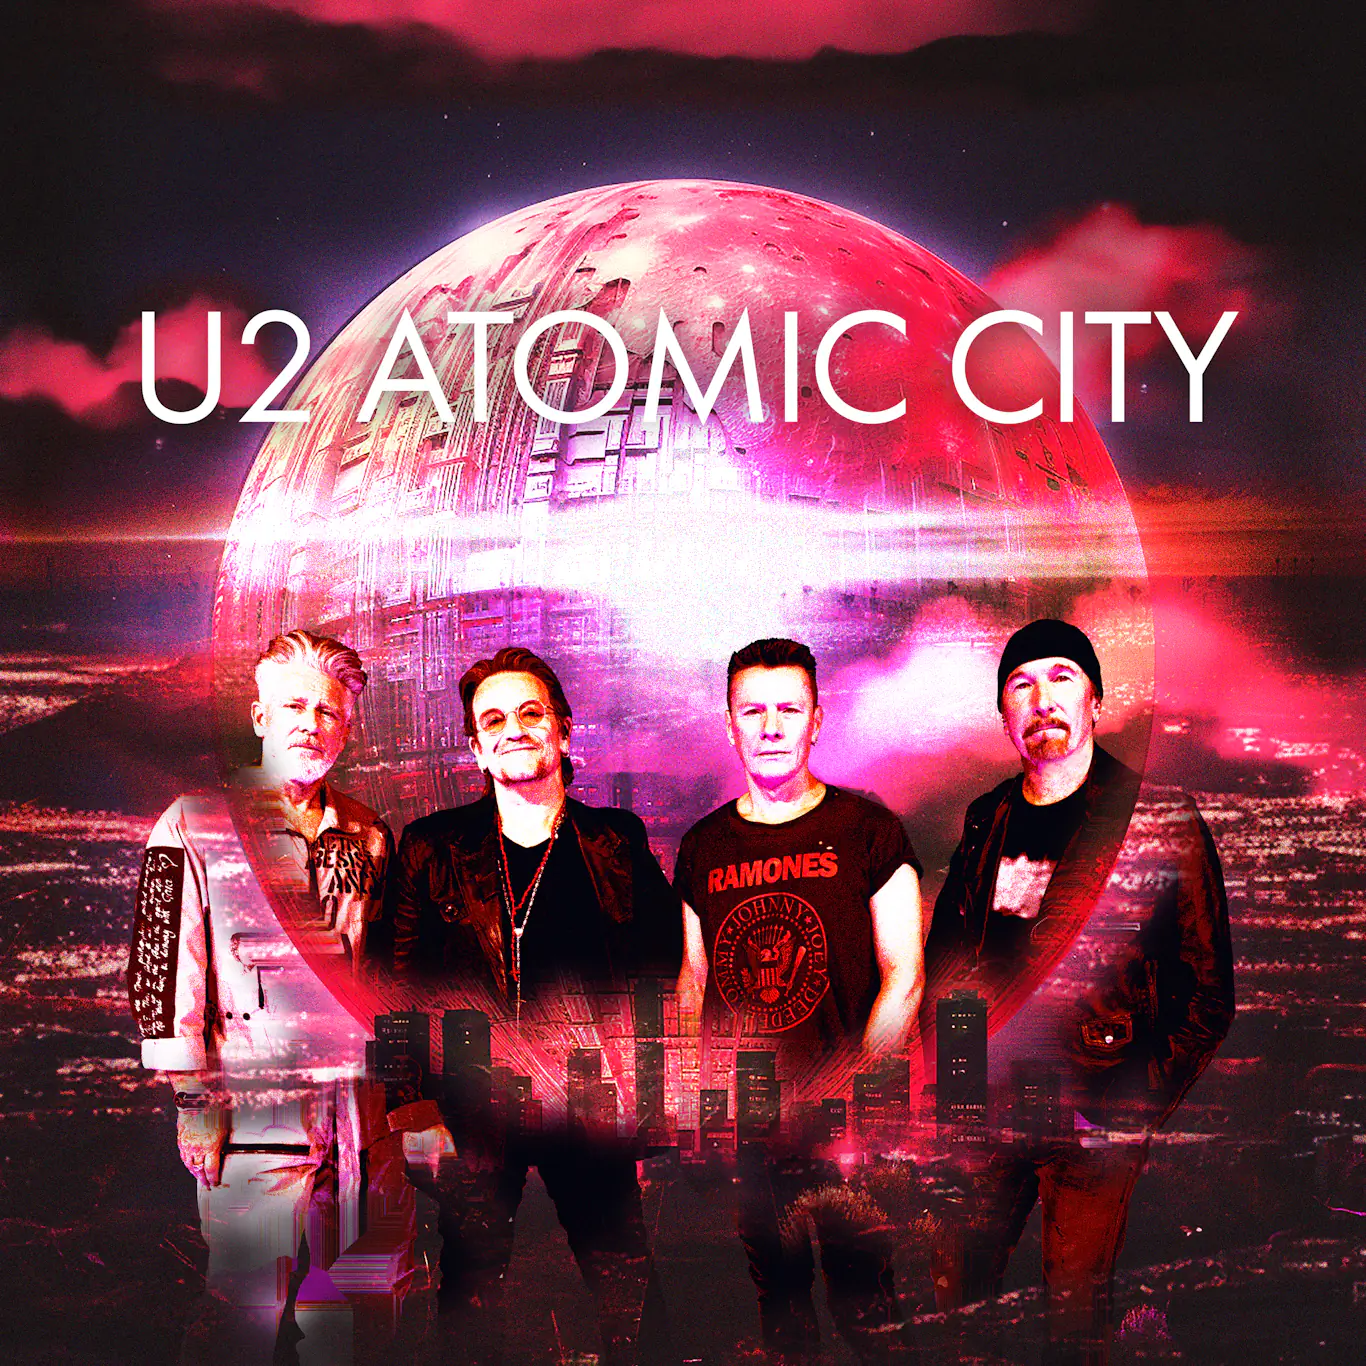 U2 unveil video for new single ‘Atomic City’